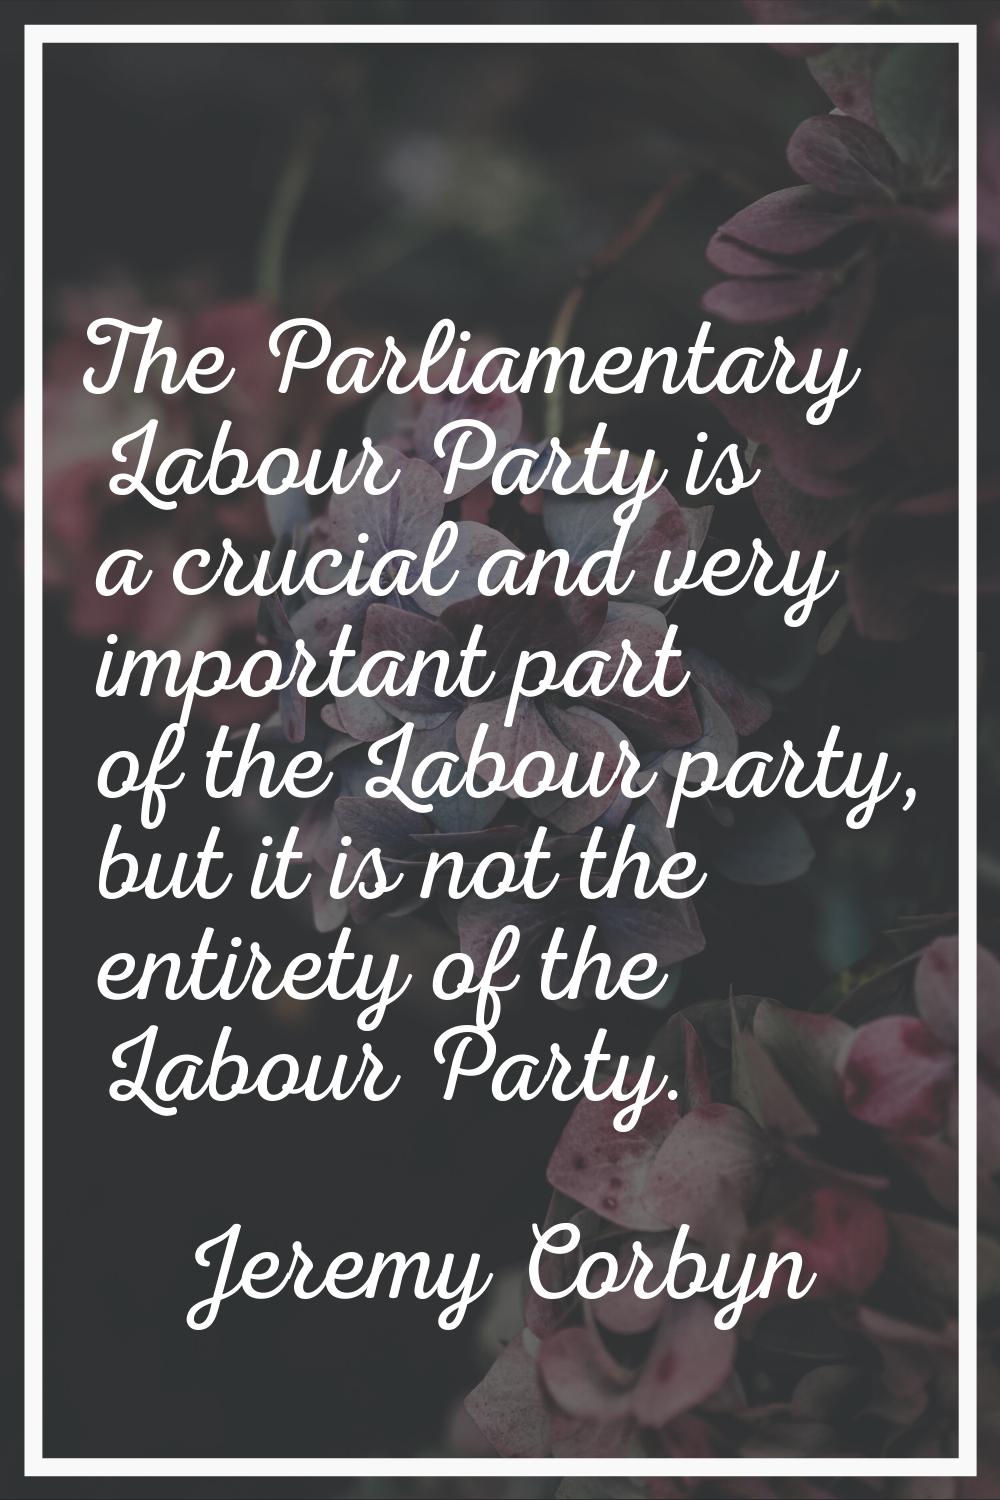 The Parliamentary Labour Party is a crucial and very important part of the Labour party, but it is 